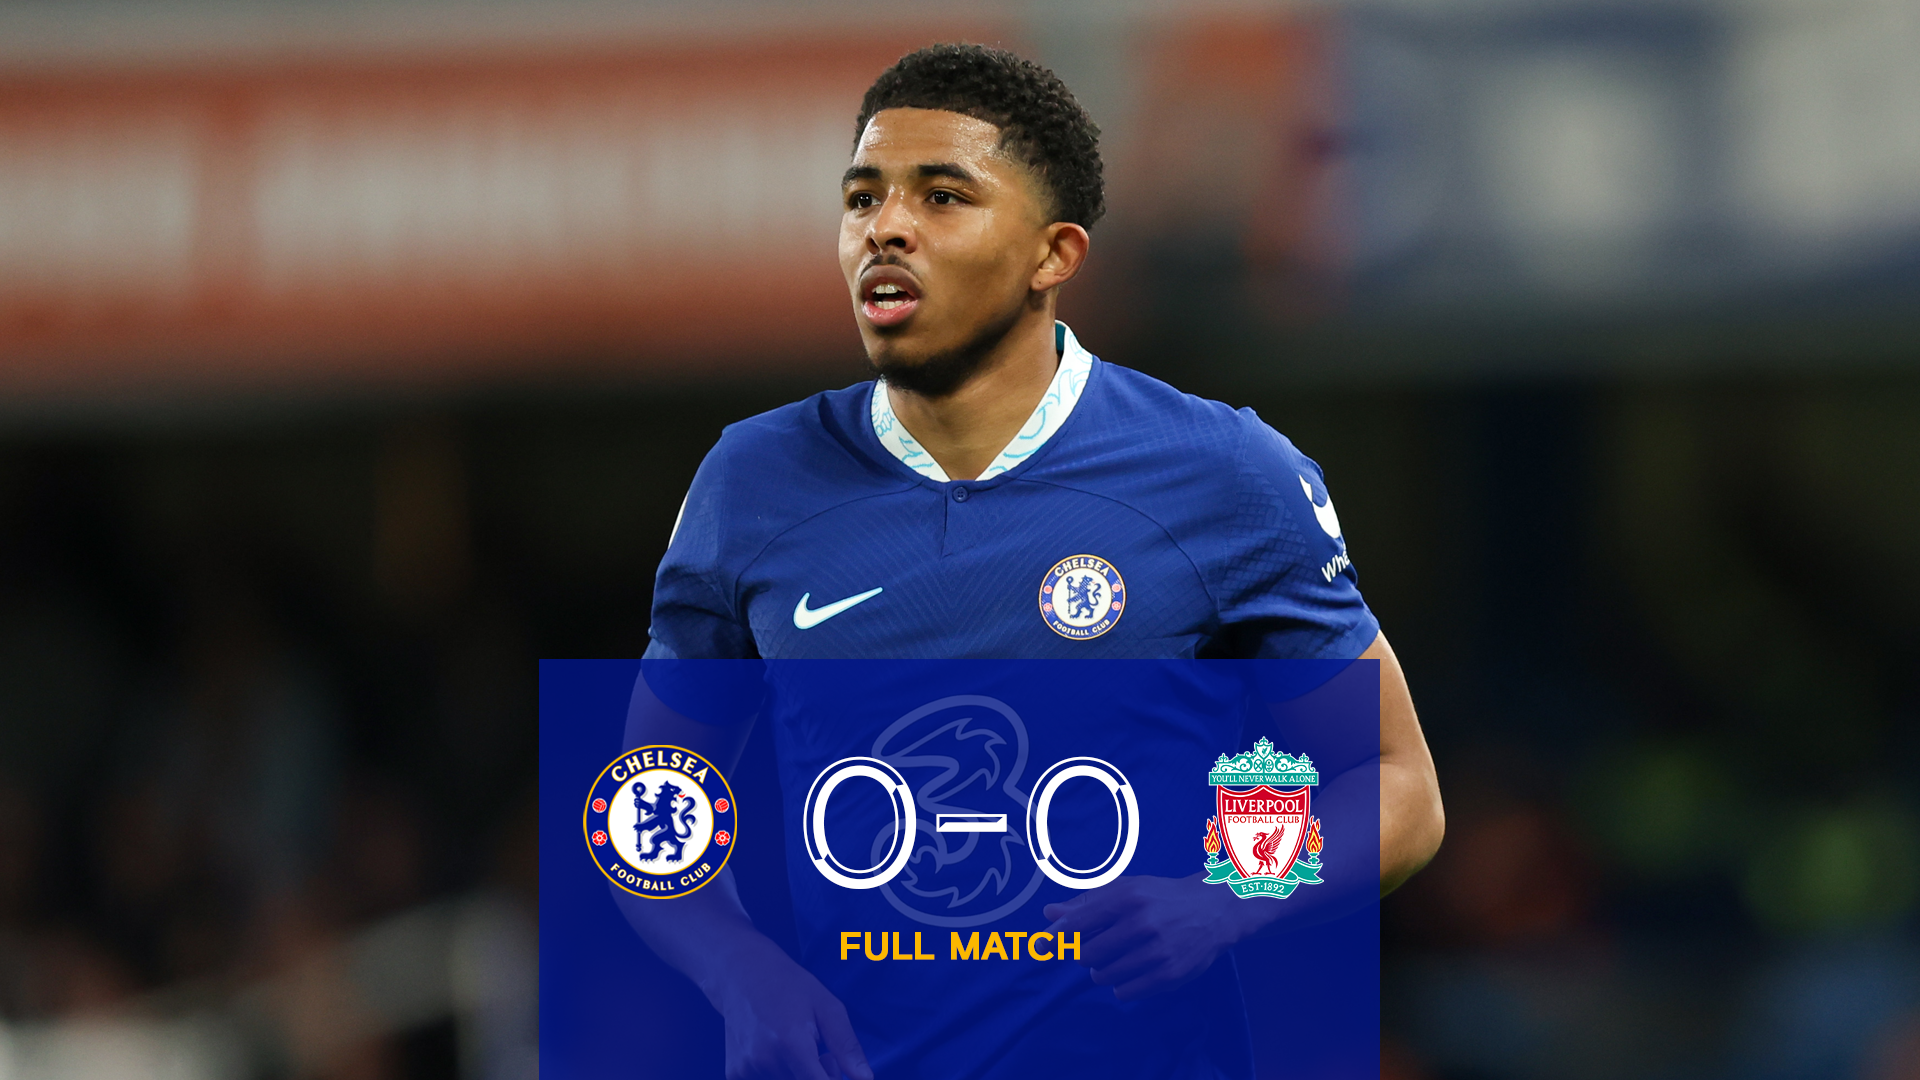 Full Match Chelsea 0-0 Liverpool Video Official Site Chelsea Football Club